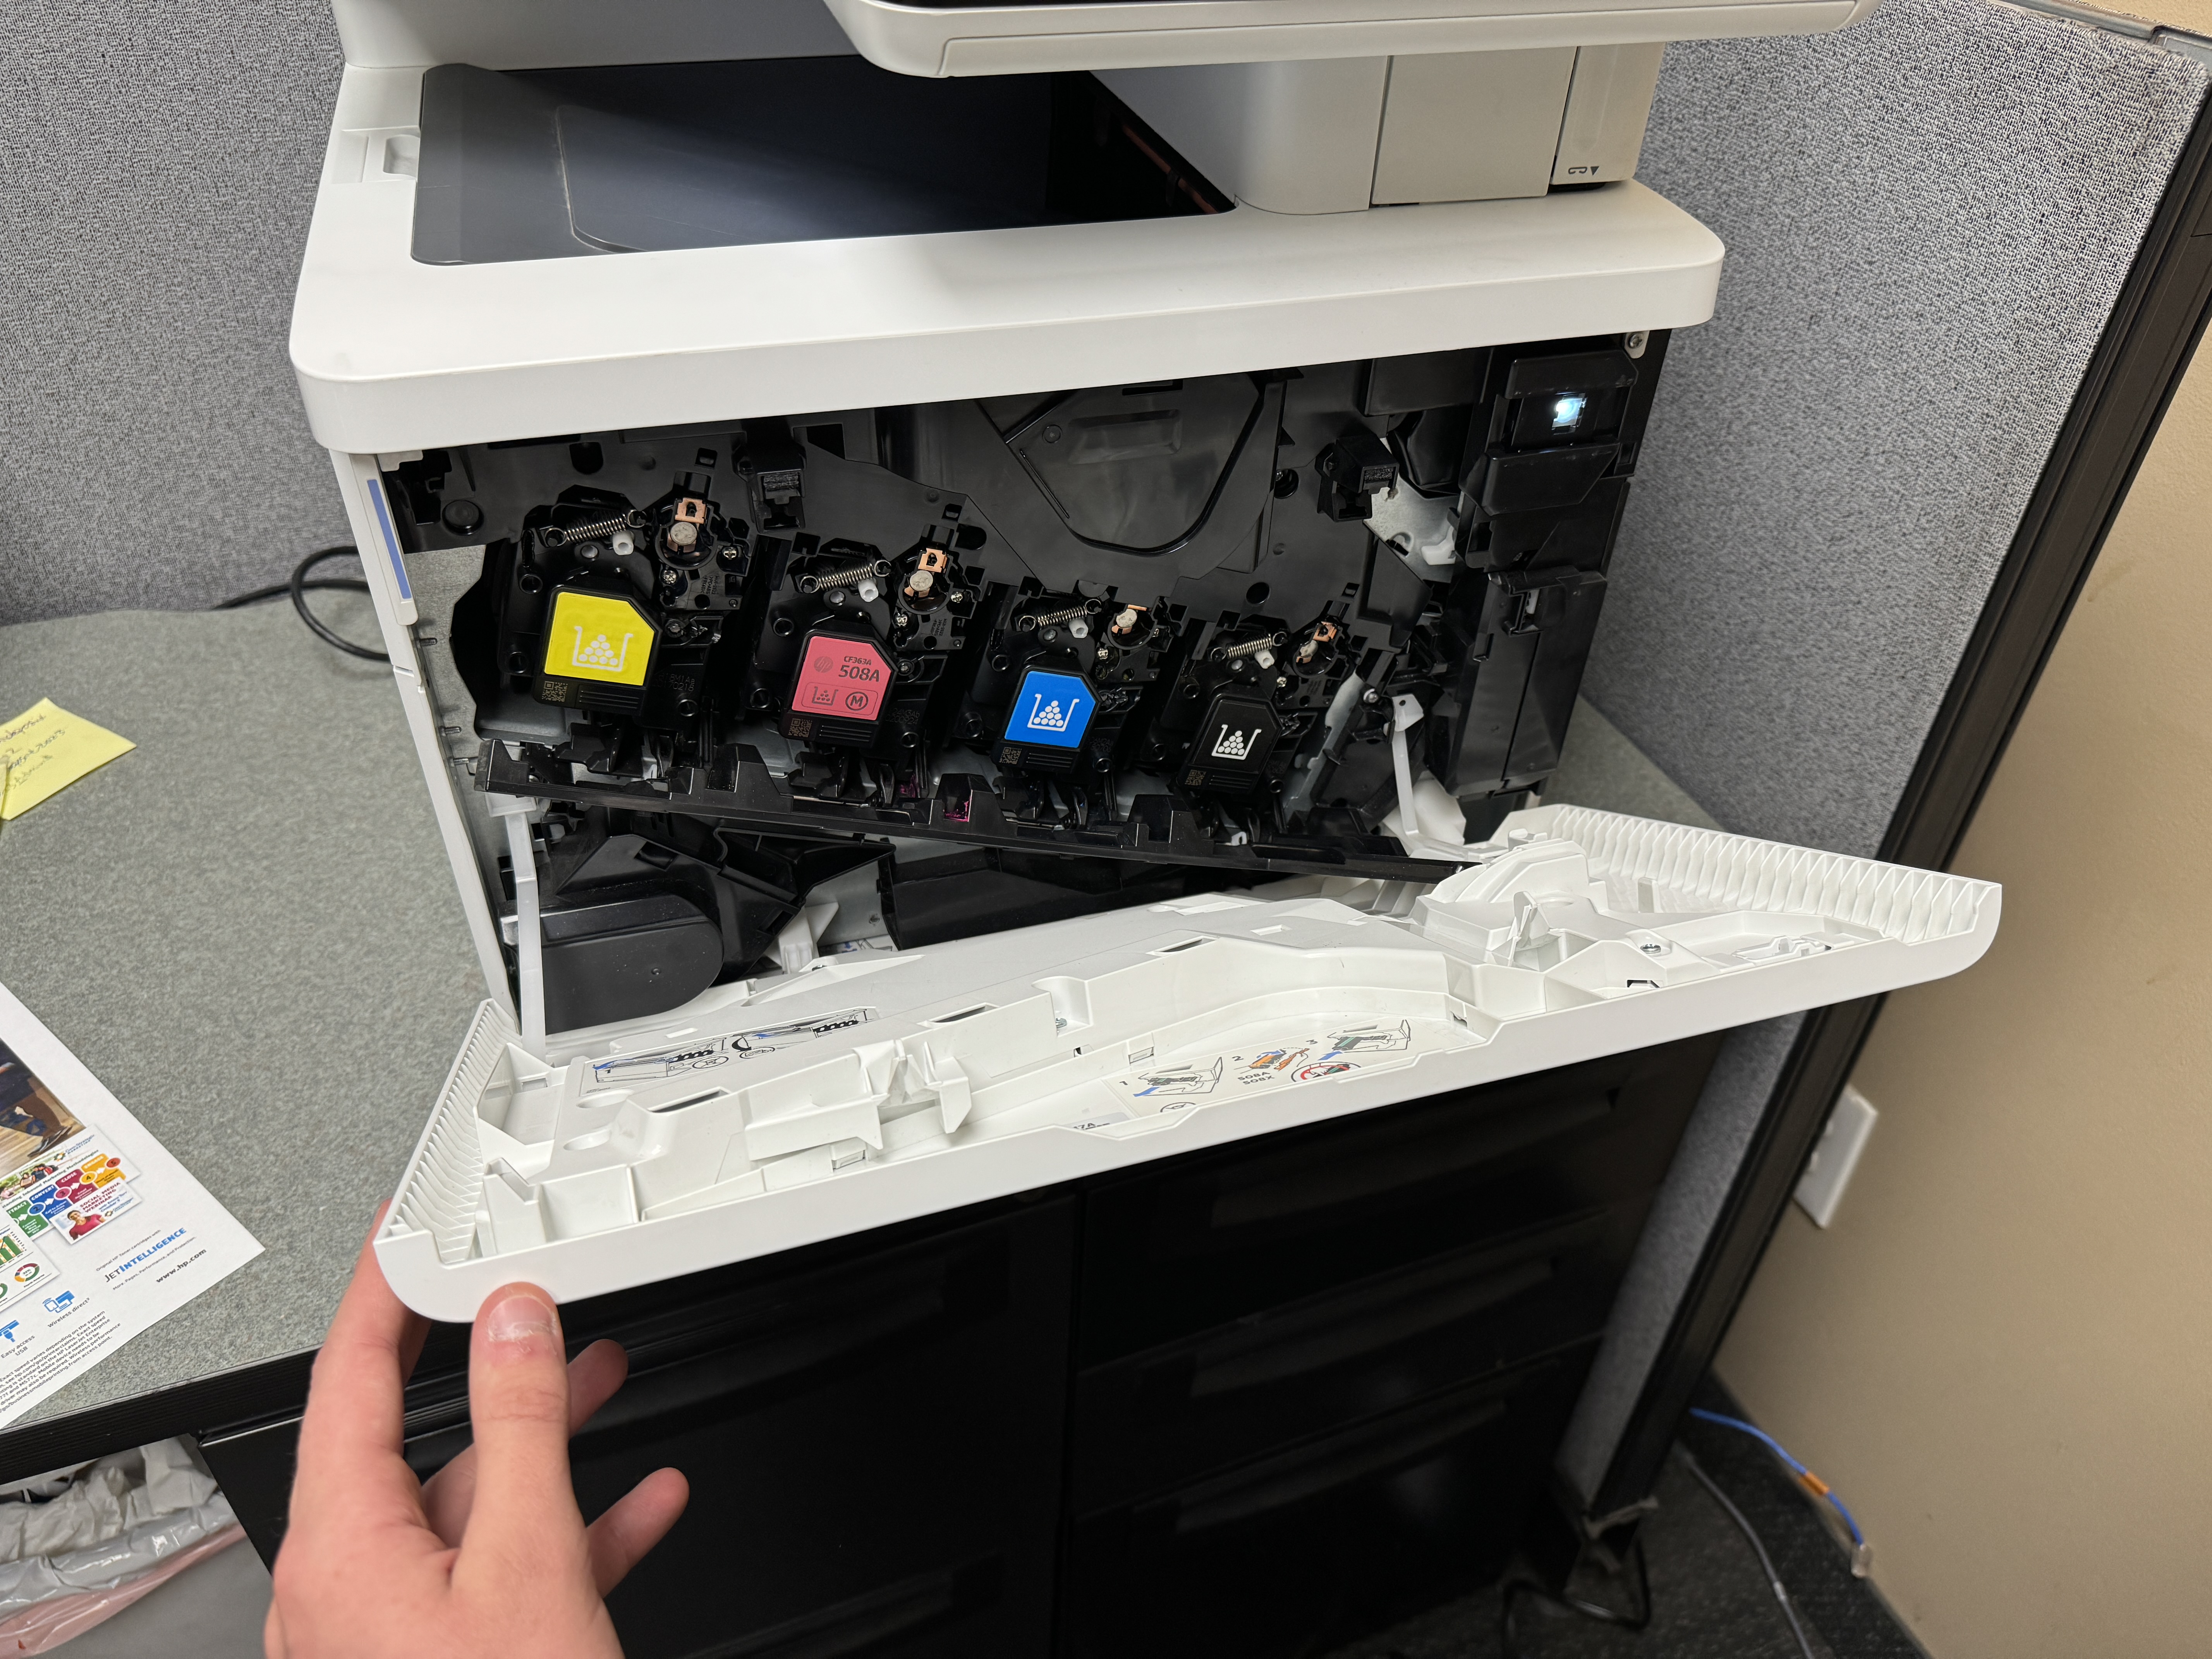 HP M577 printing services rochester mn. 